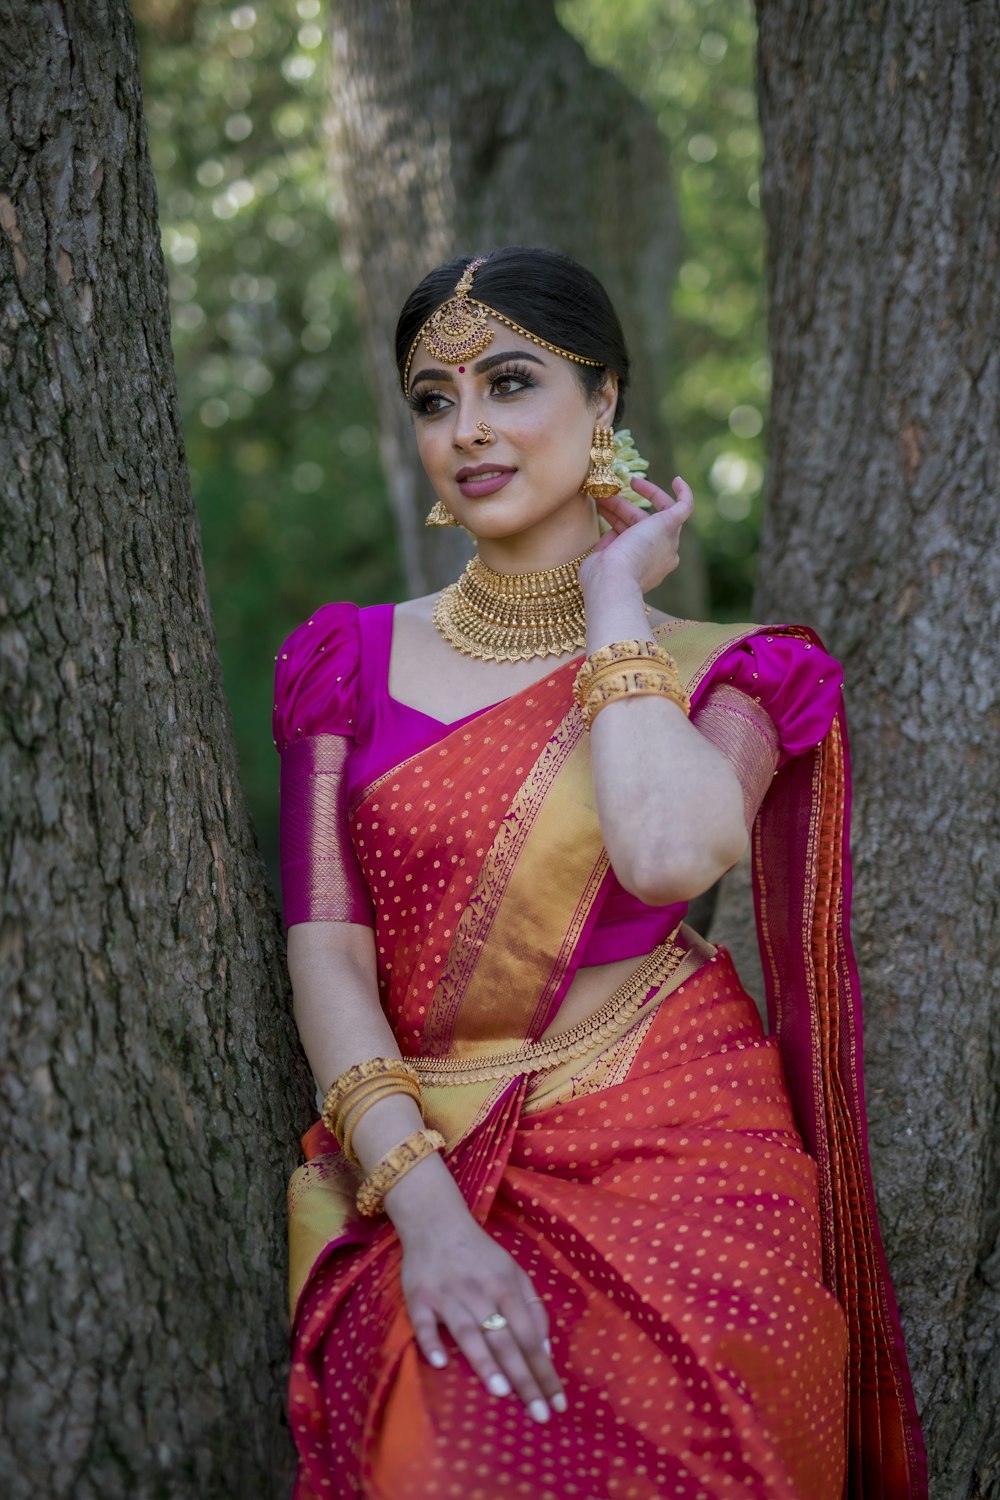 woman in red and blue sari dress photo – Free London Image on Unsplash